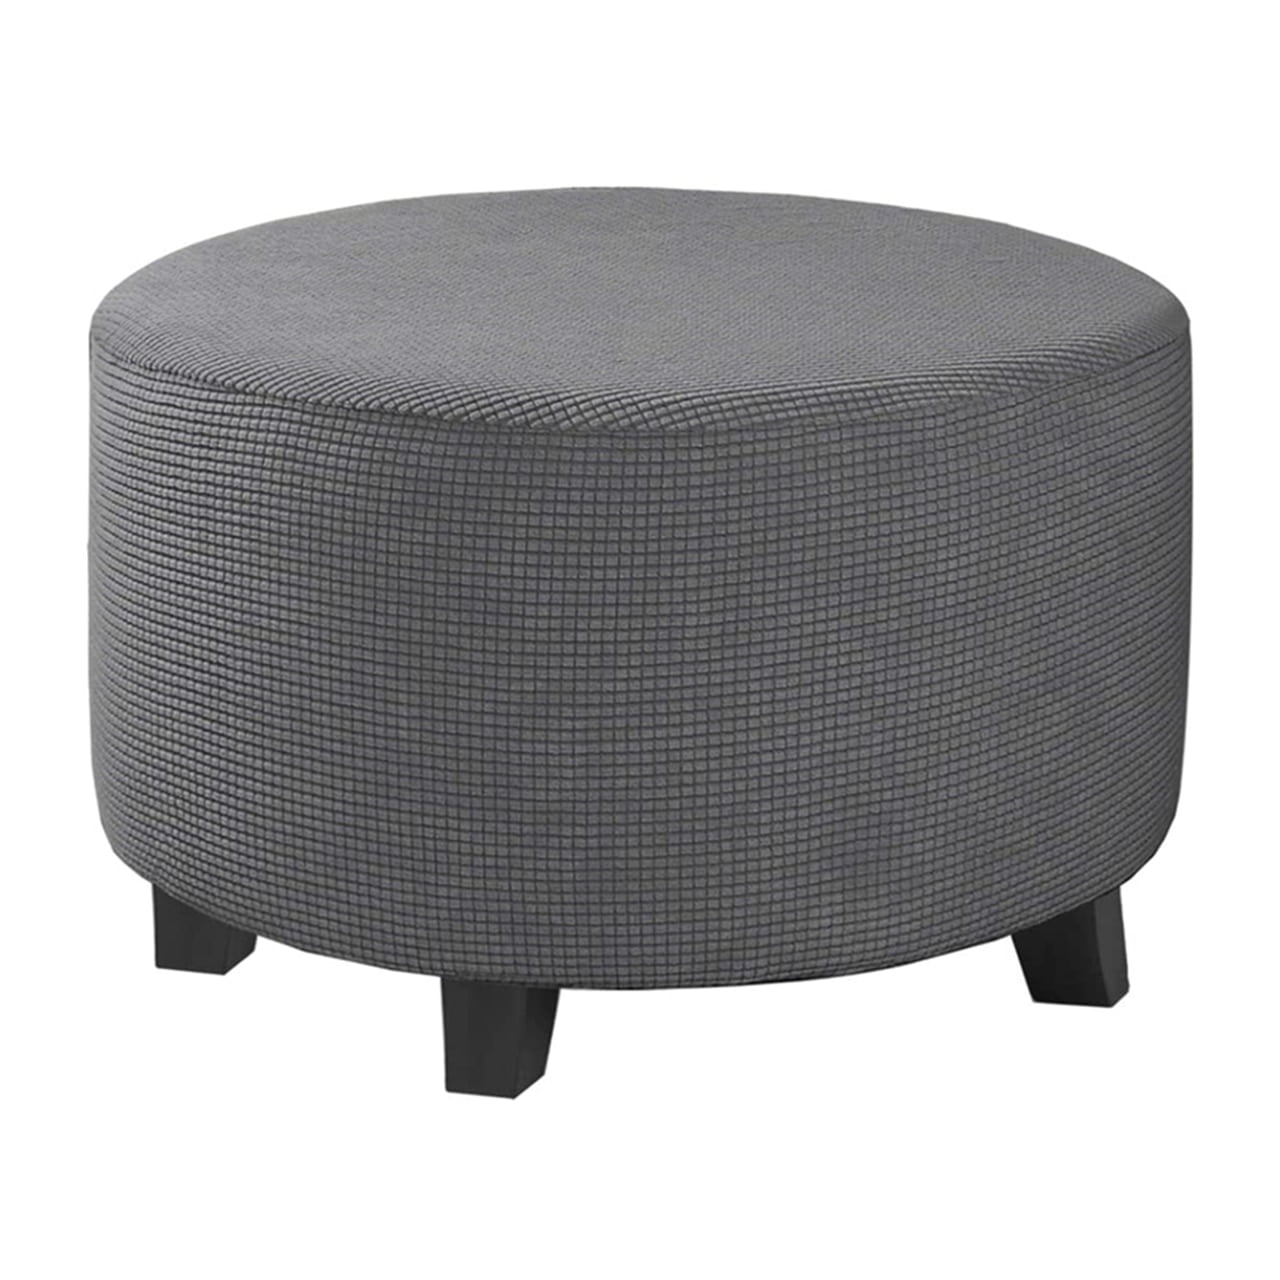 Elastic Stretchy Fabric Ottoman Cover Home Furniture Footstool Protect Slipcover 